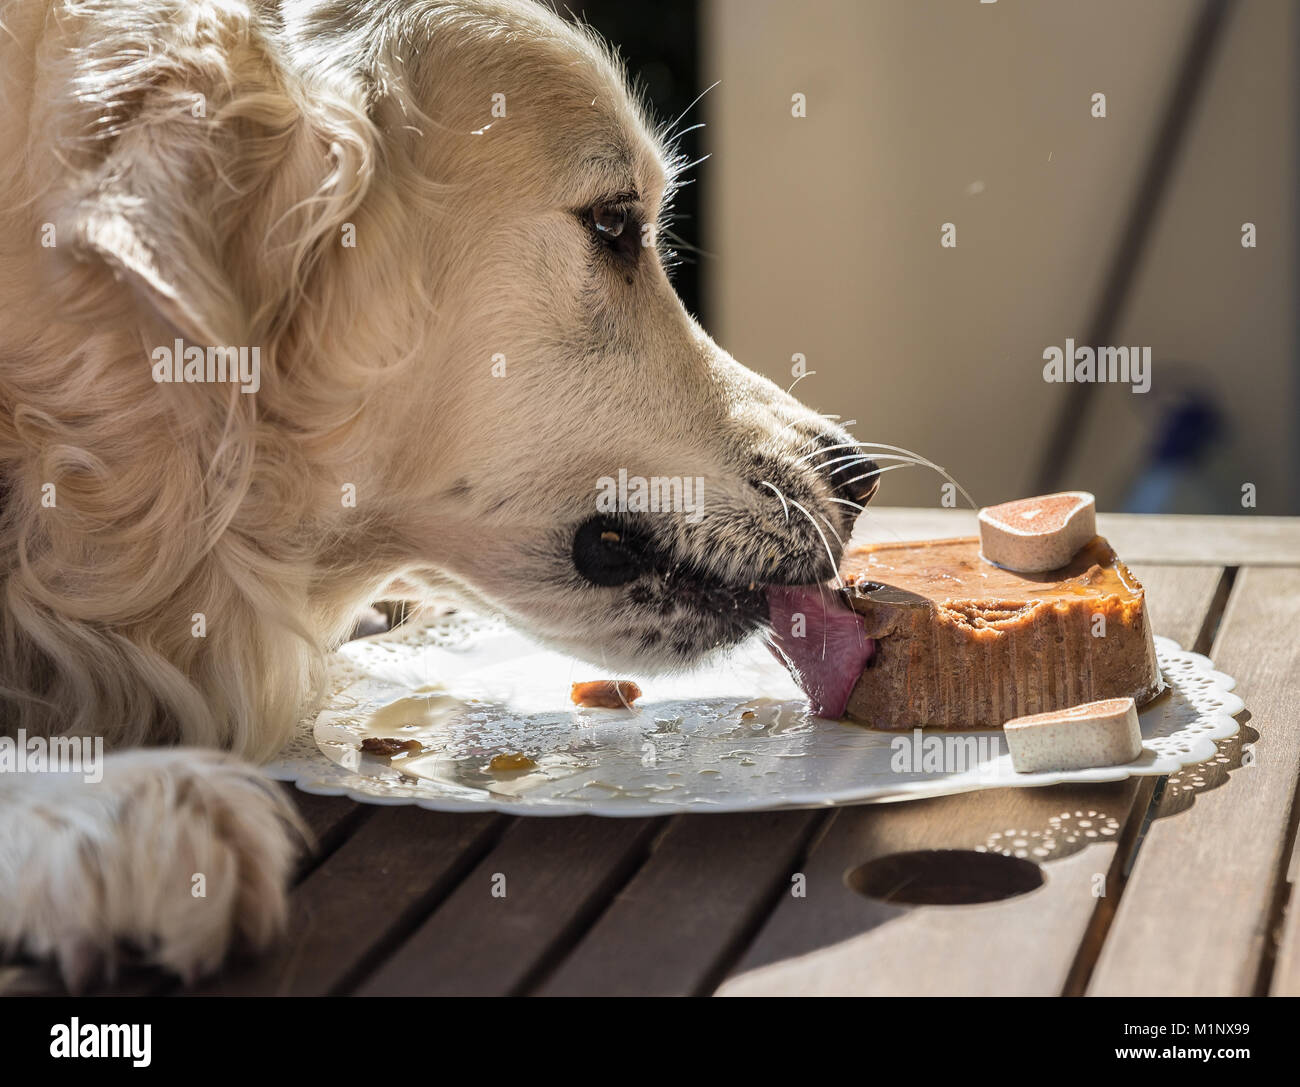 the birthday celebration of my golden dog named Prince, which devours in record time a dog cake, with facial expressions and gestures that make them l Stock Photo